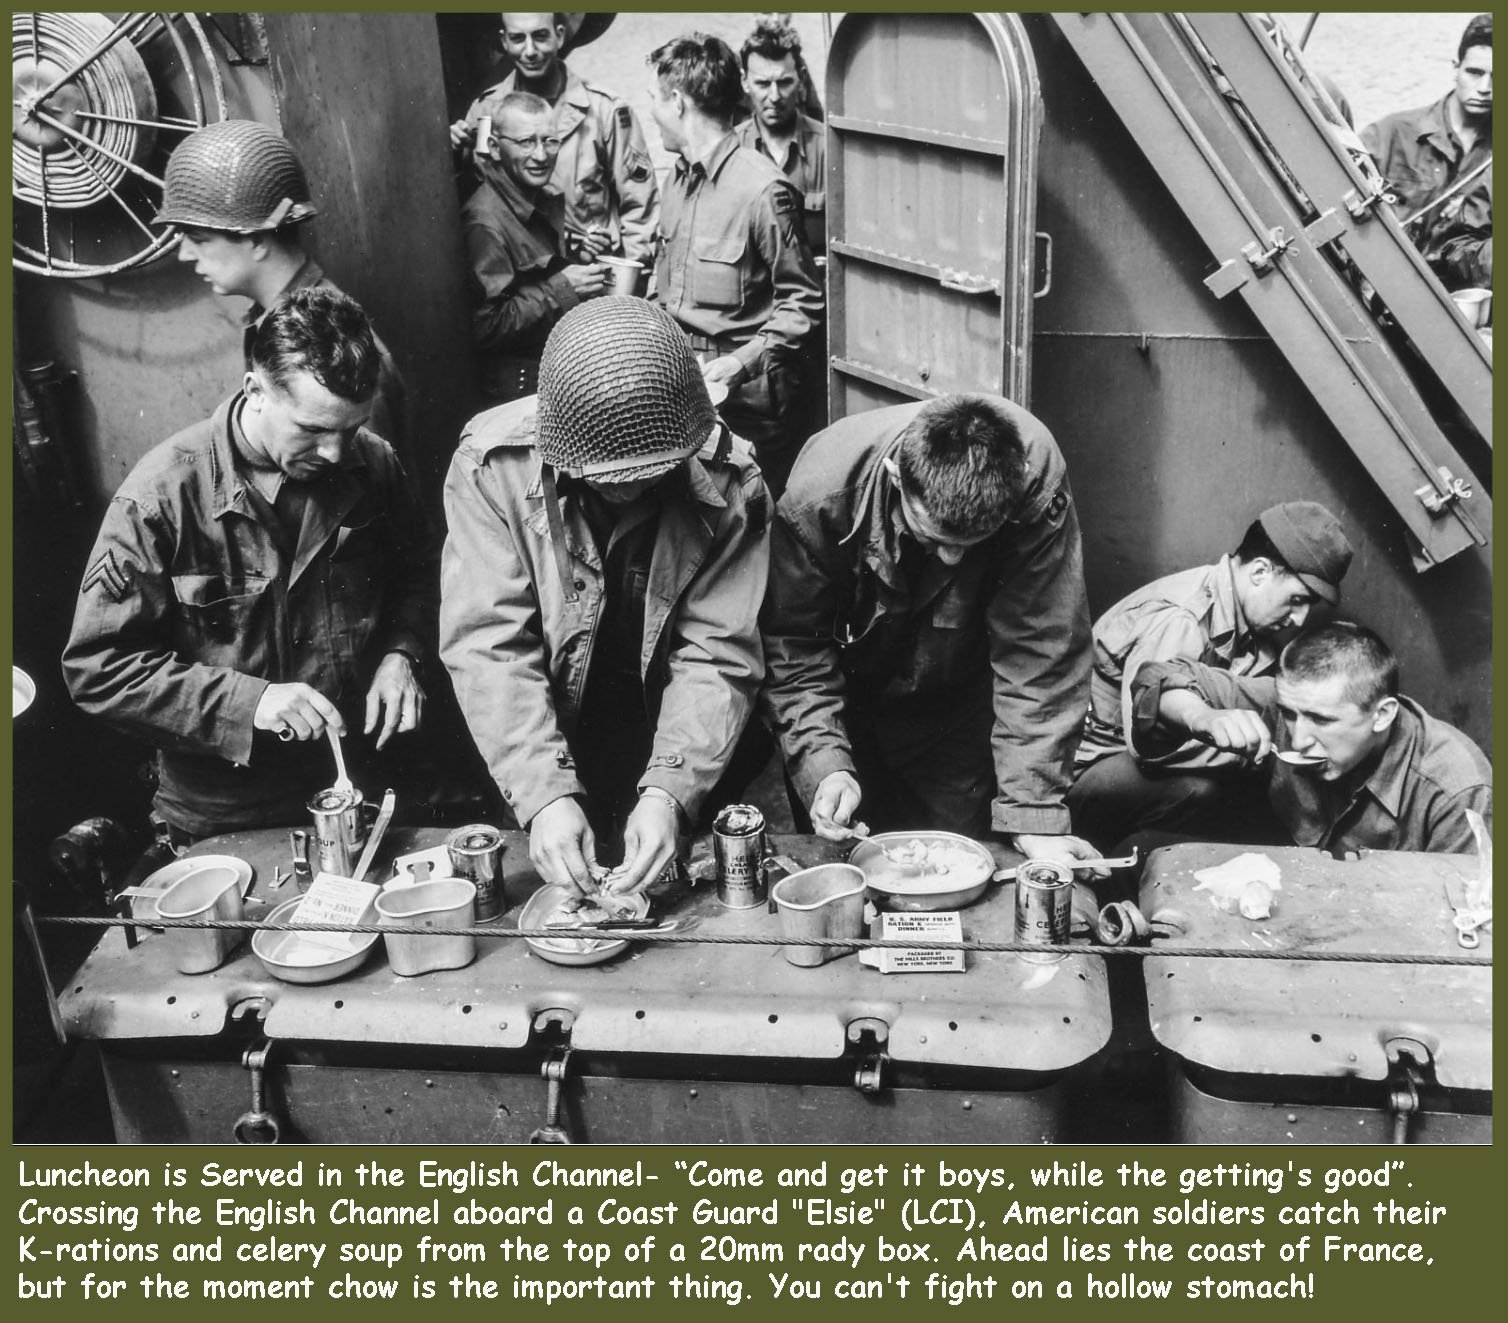 American Soldiers Crossing the English Channel aboard a Coast Guard Elsie (LCI)